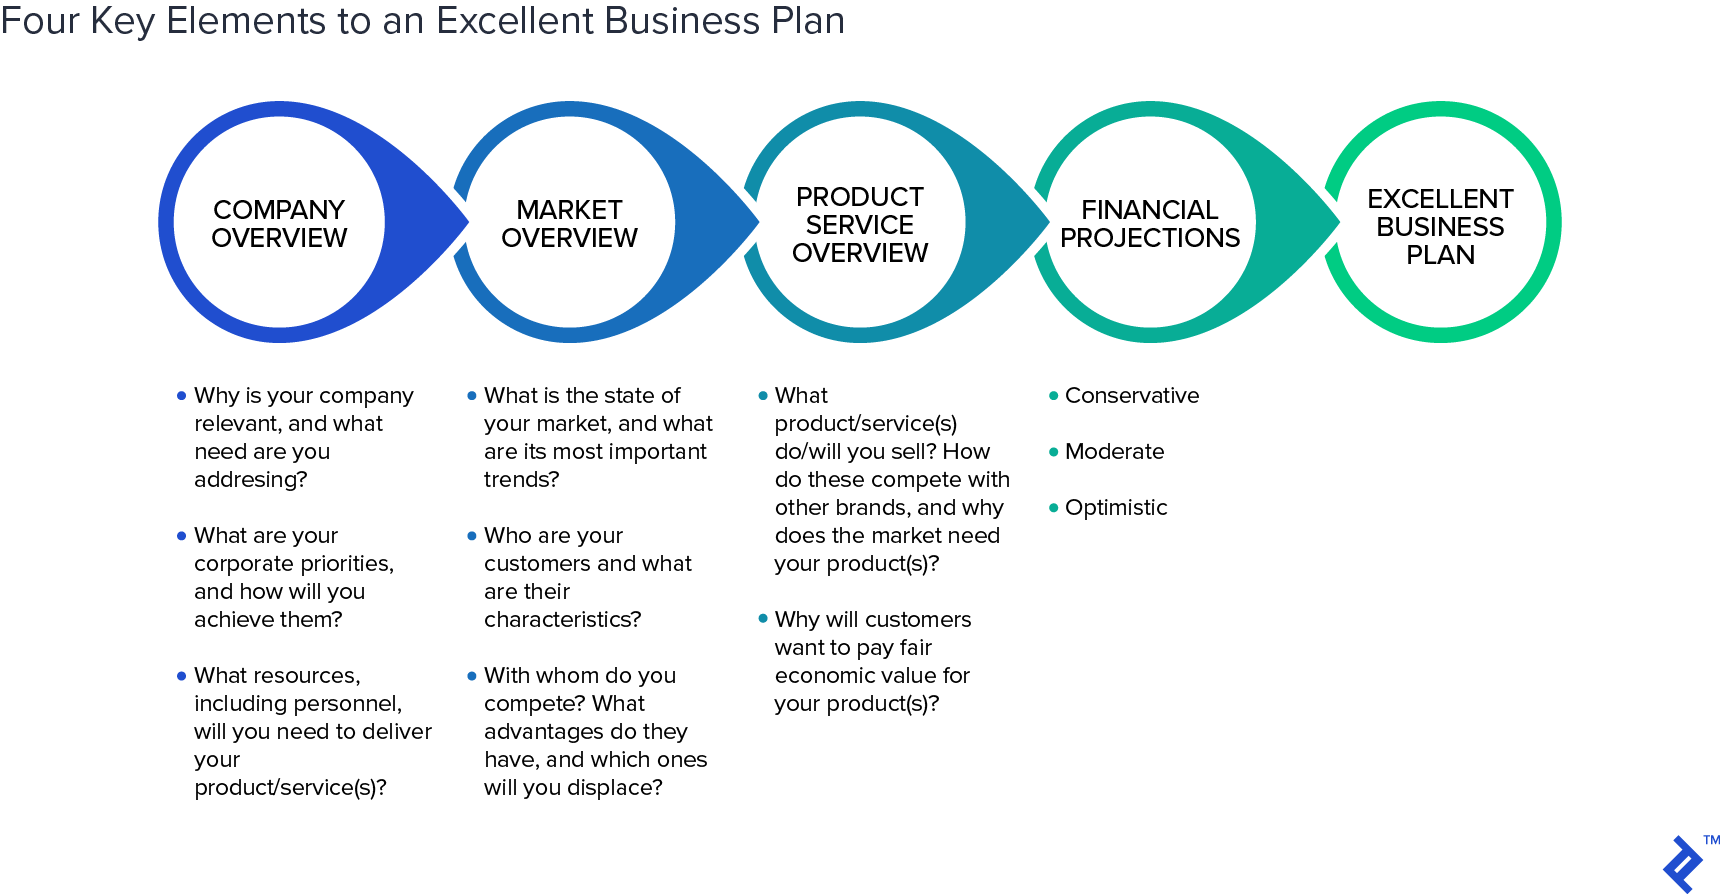 A diagram showing four key elements to an excellent business plan